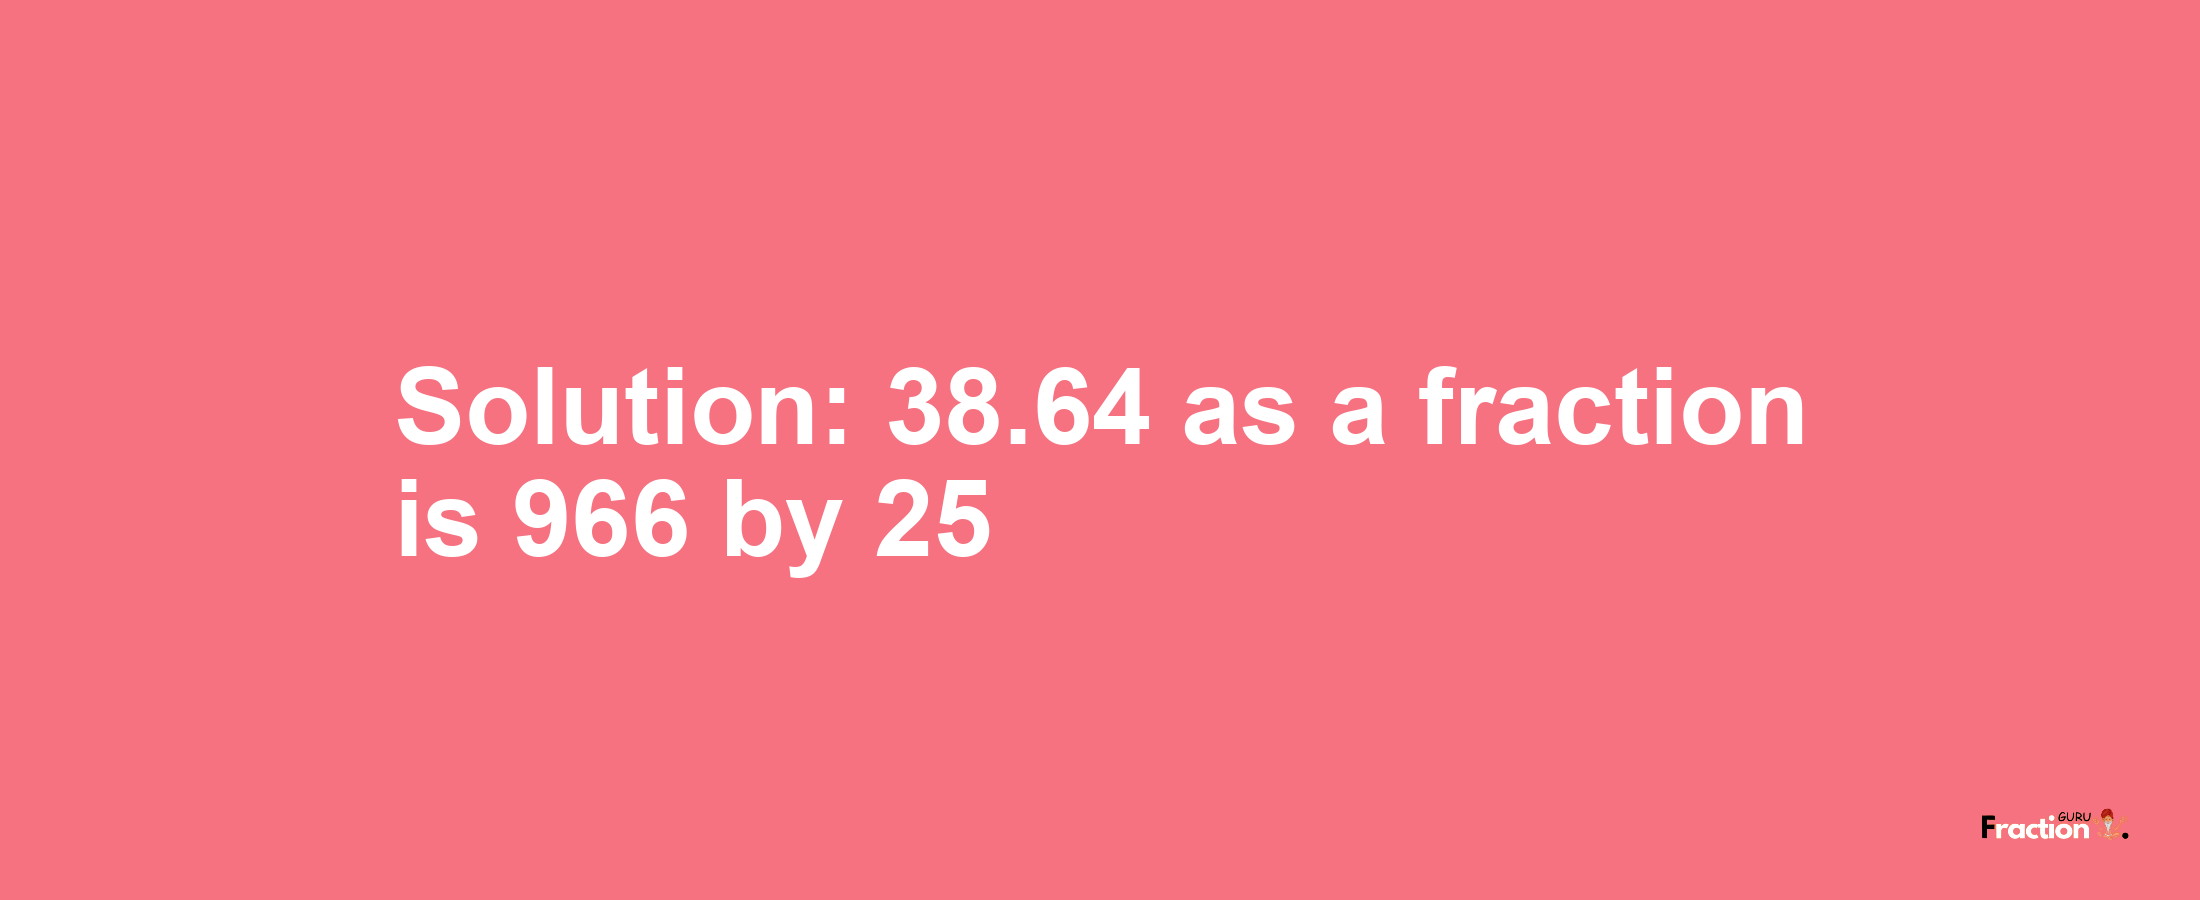 Solution:38.64 as a fraction is 966/25